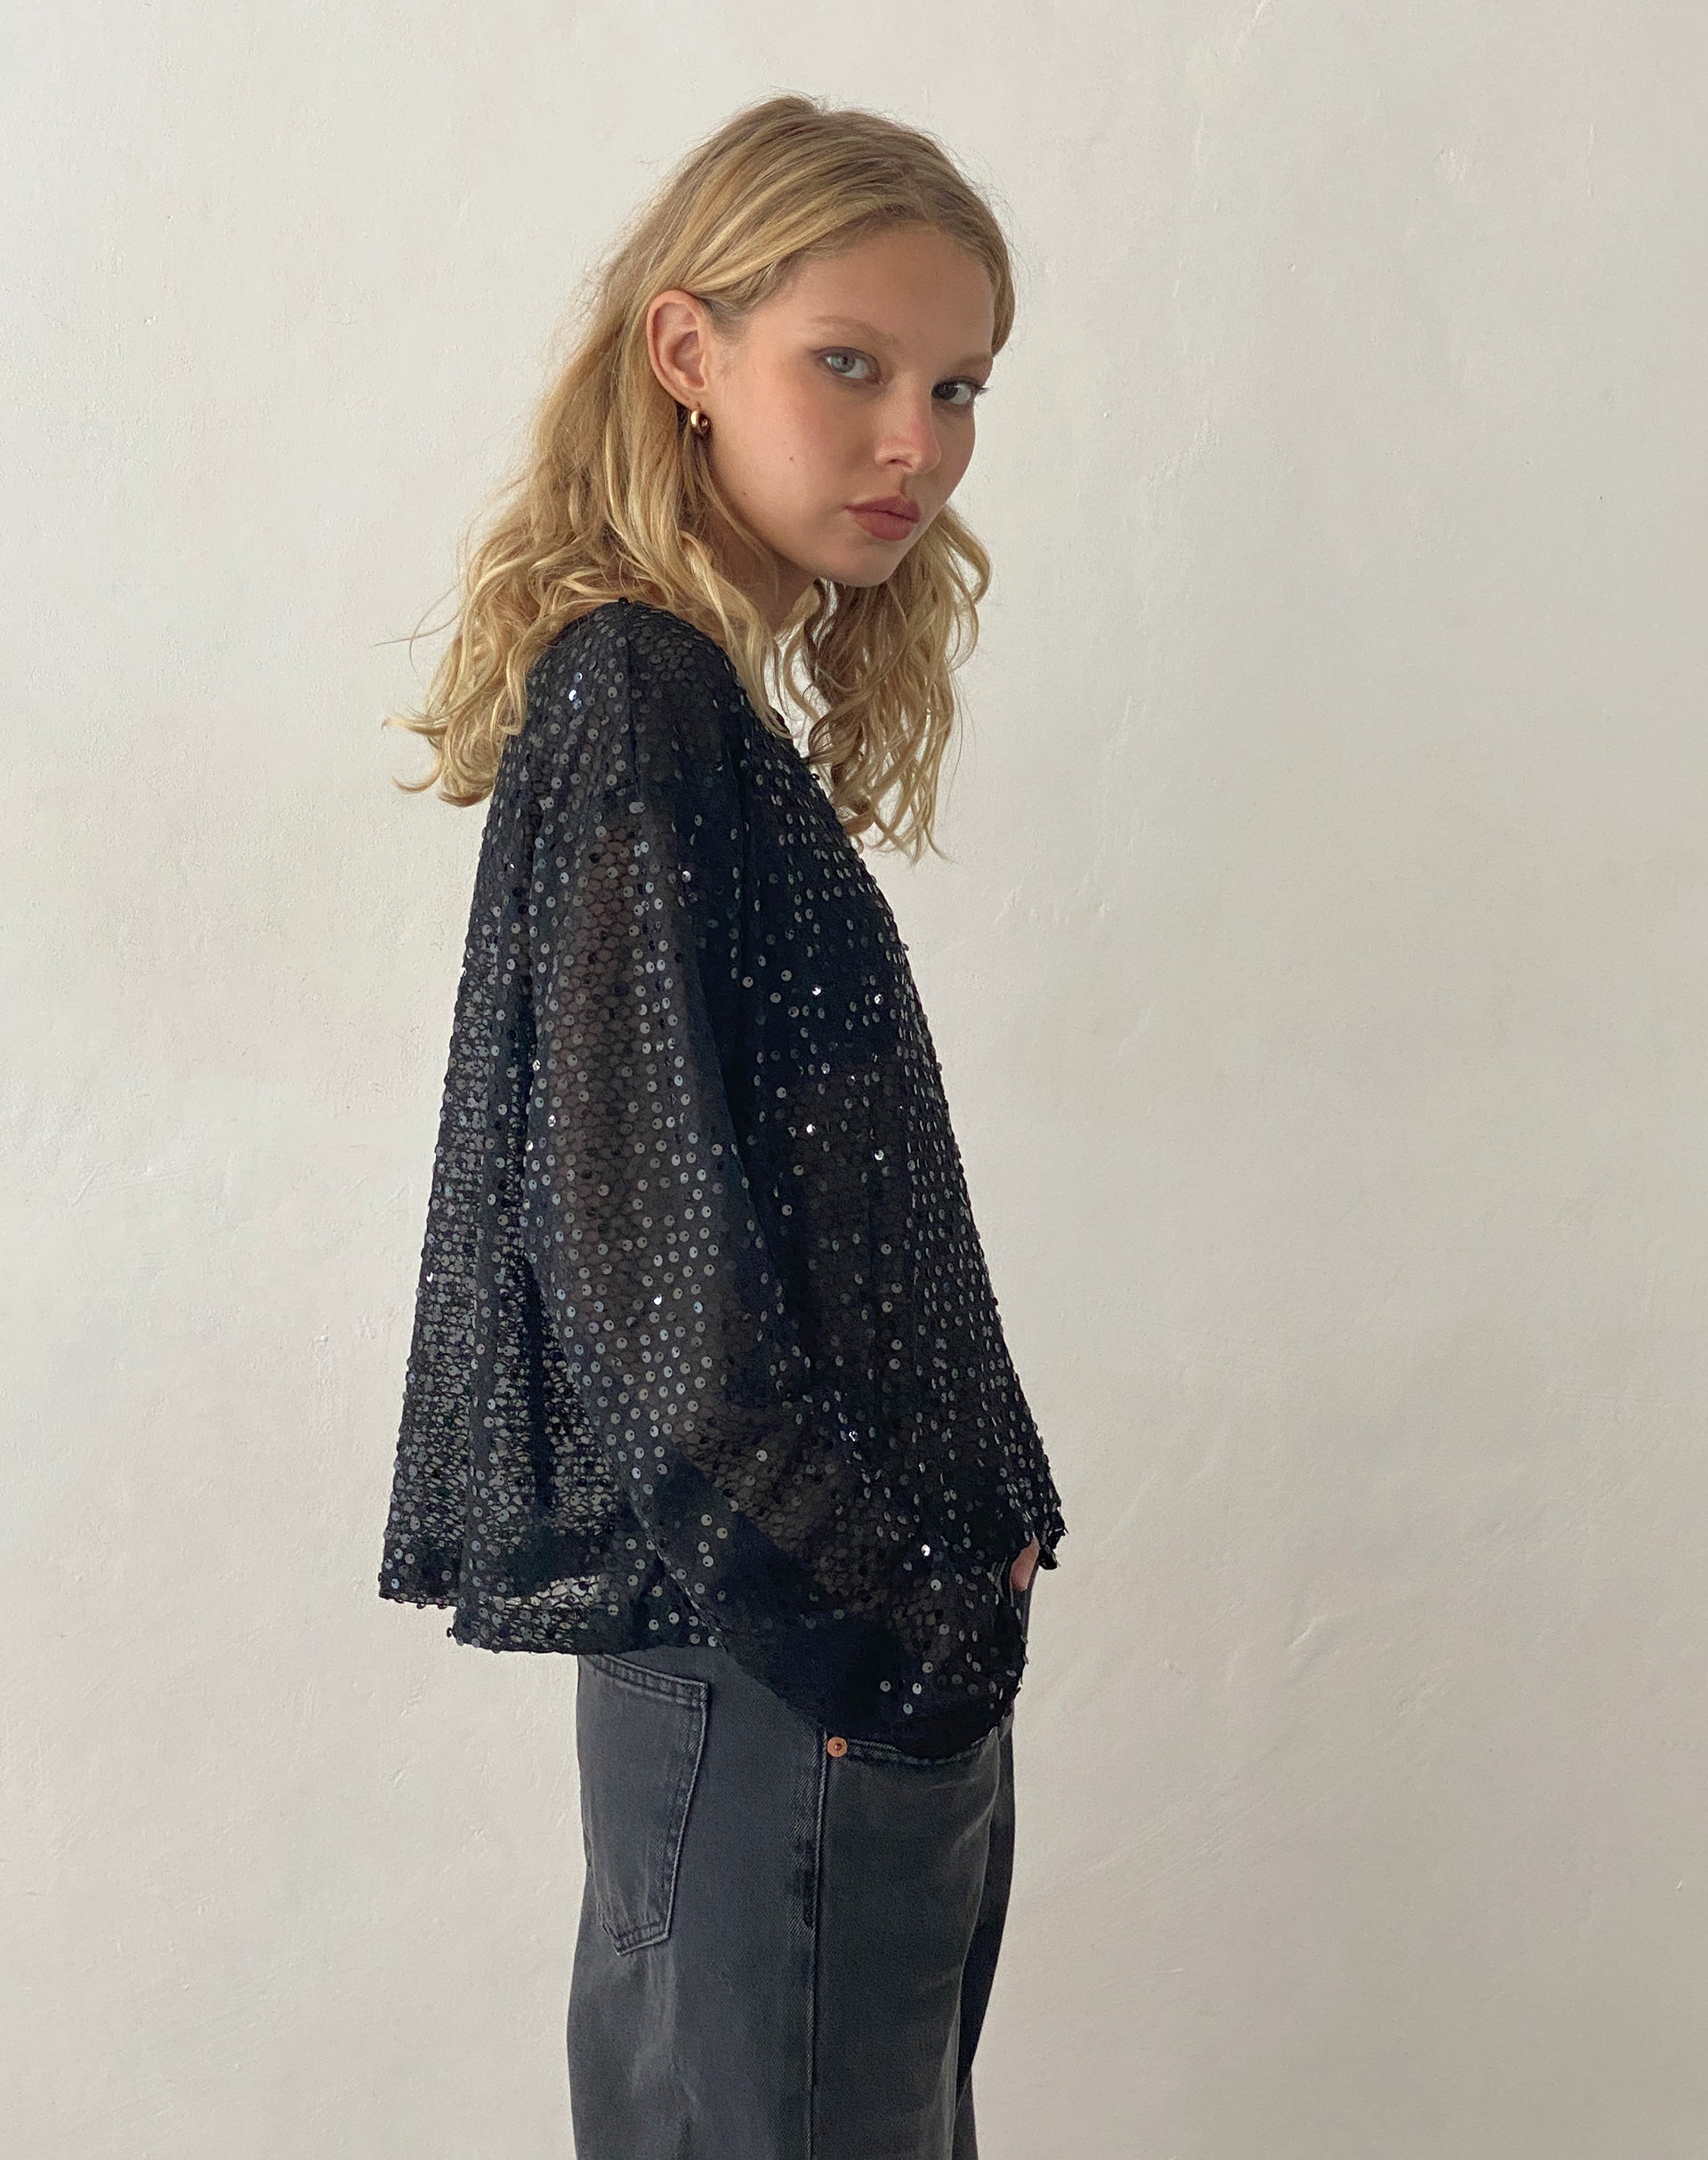 Image of Aridani Unlined Long Sleeve Top in Black Sequin